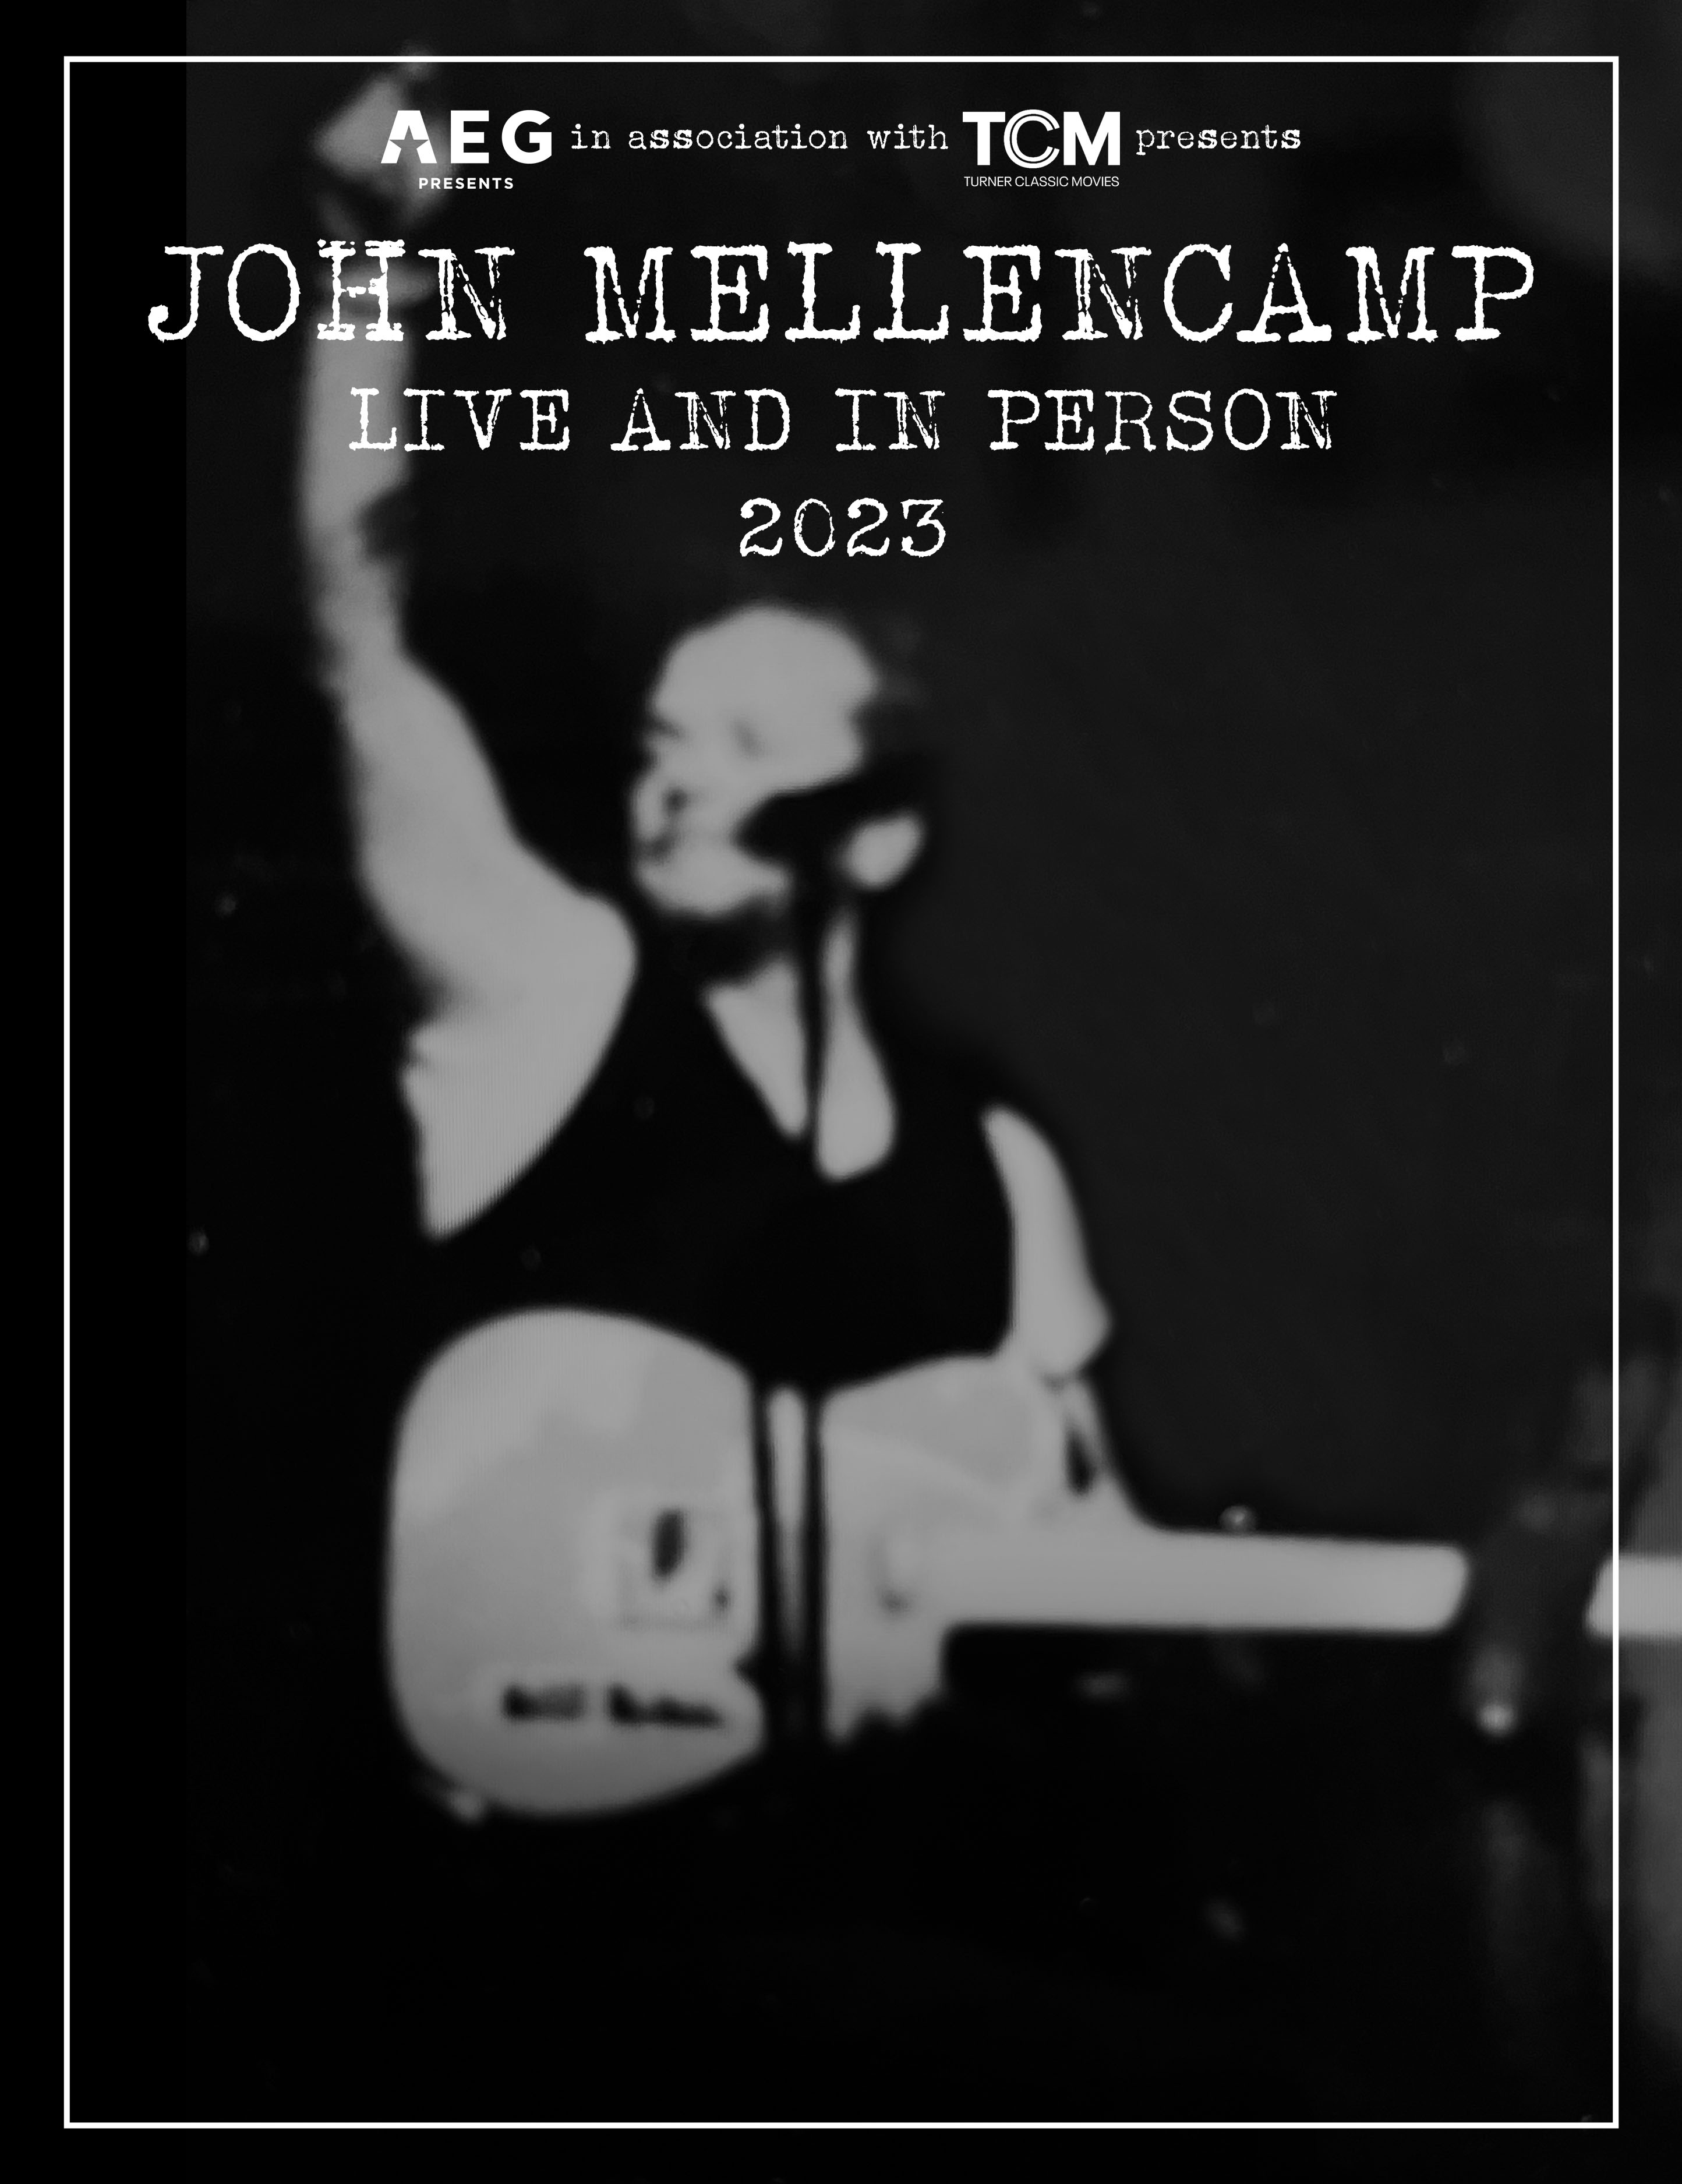 JOHN MELLENCAMP SETS “LIVE AND IN PERSON 2023” NORTH AMERICAN TOUR DATES